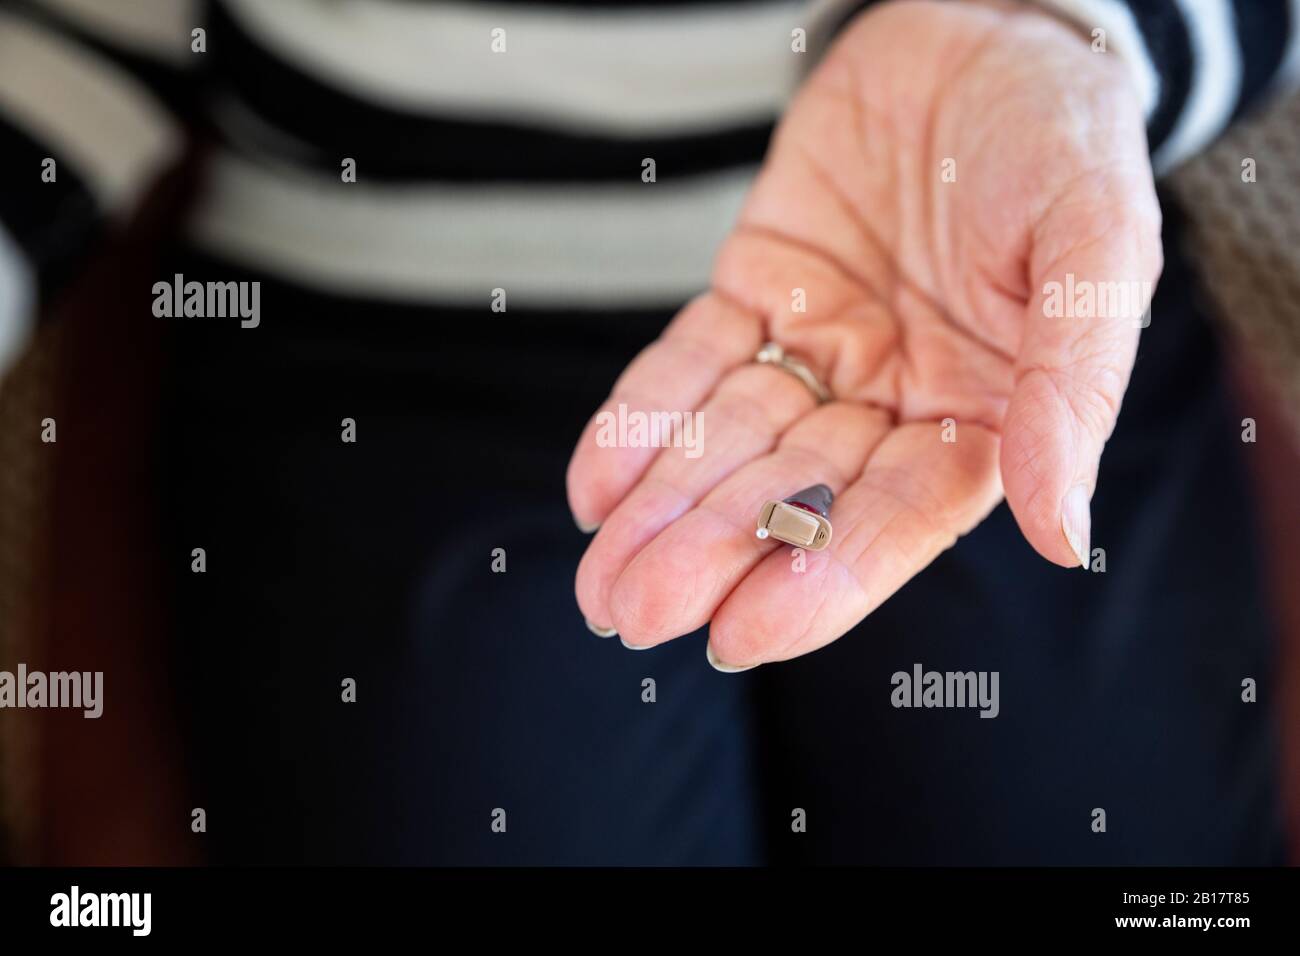 Senior woman's hand with modern hearing aid Stock Photo